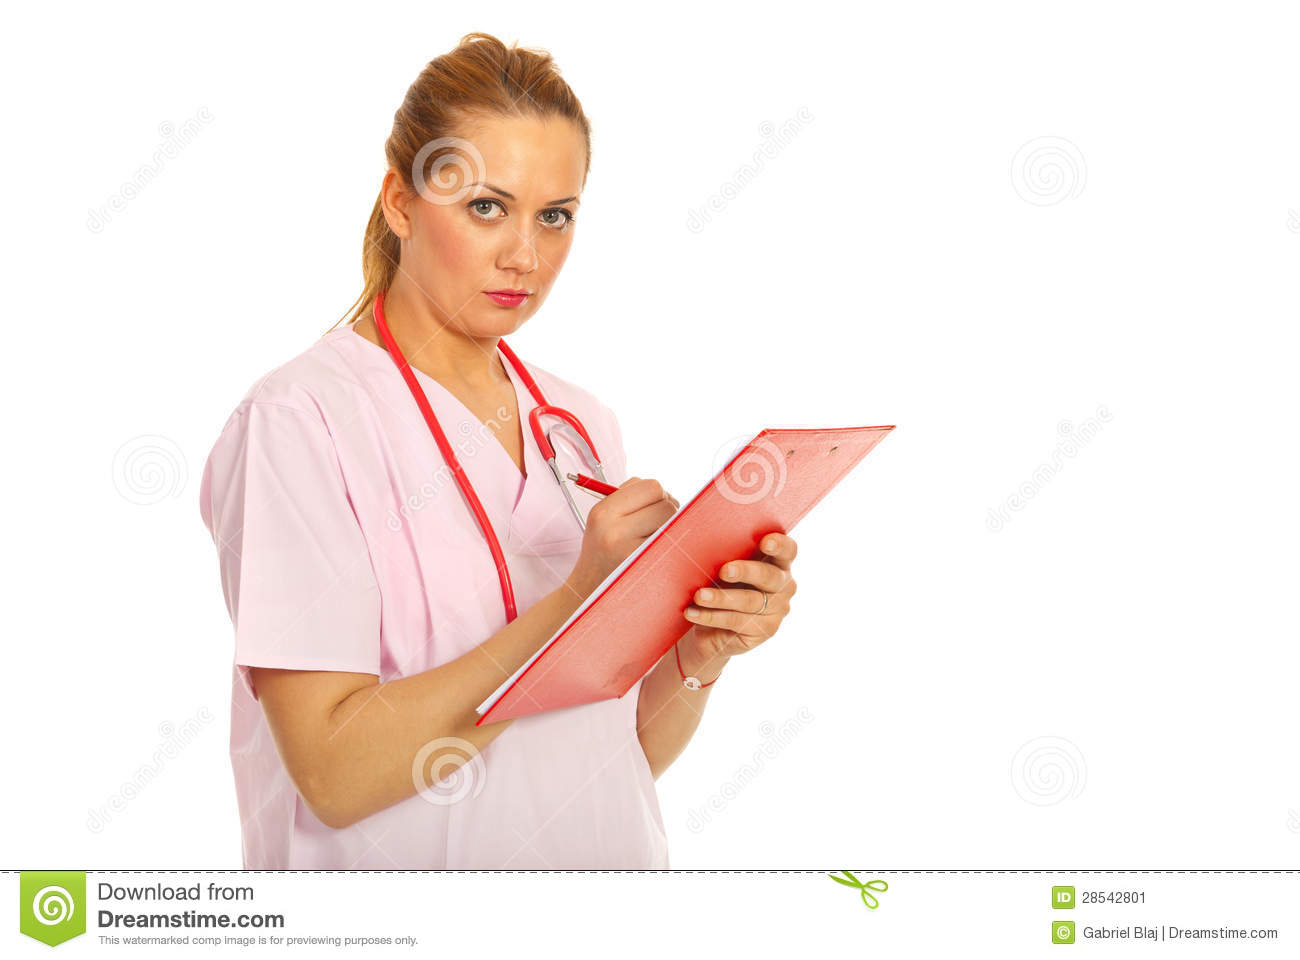 Nurse With Clipboard Stock Image   Image  28542801